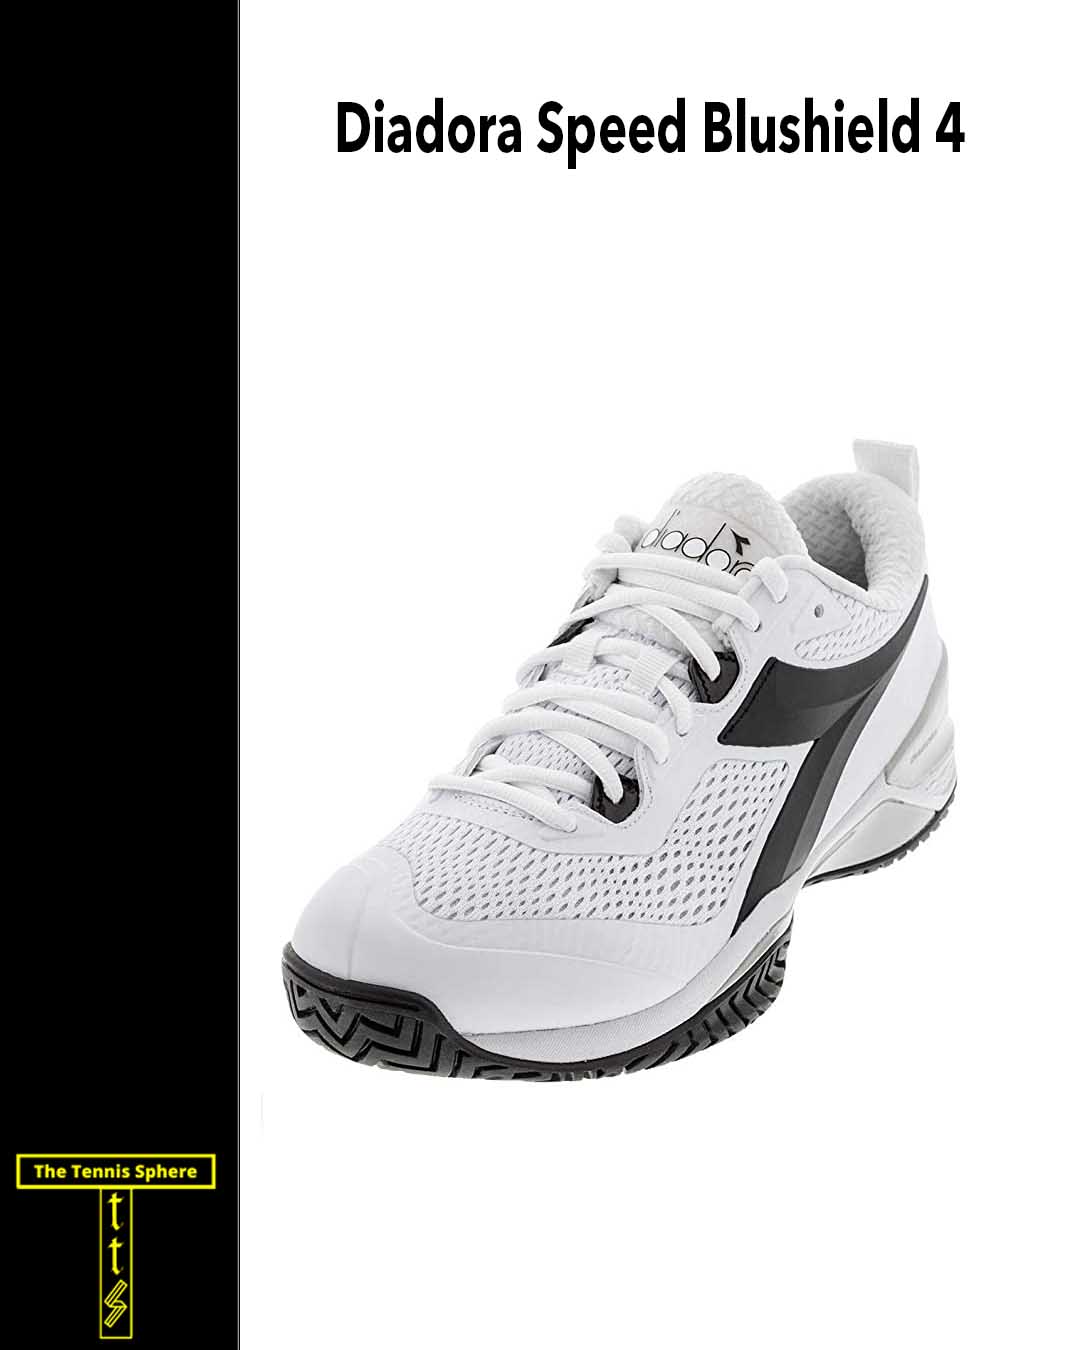 Best Tennis Shoes For Achilles Tendonitis- Reviewed